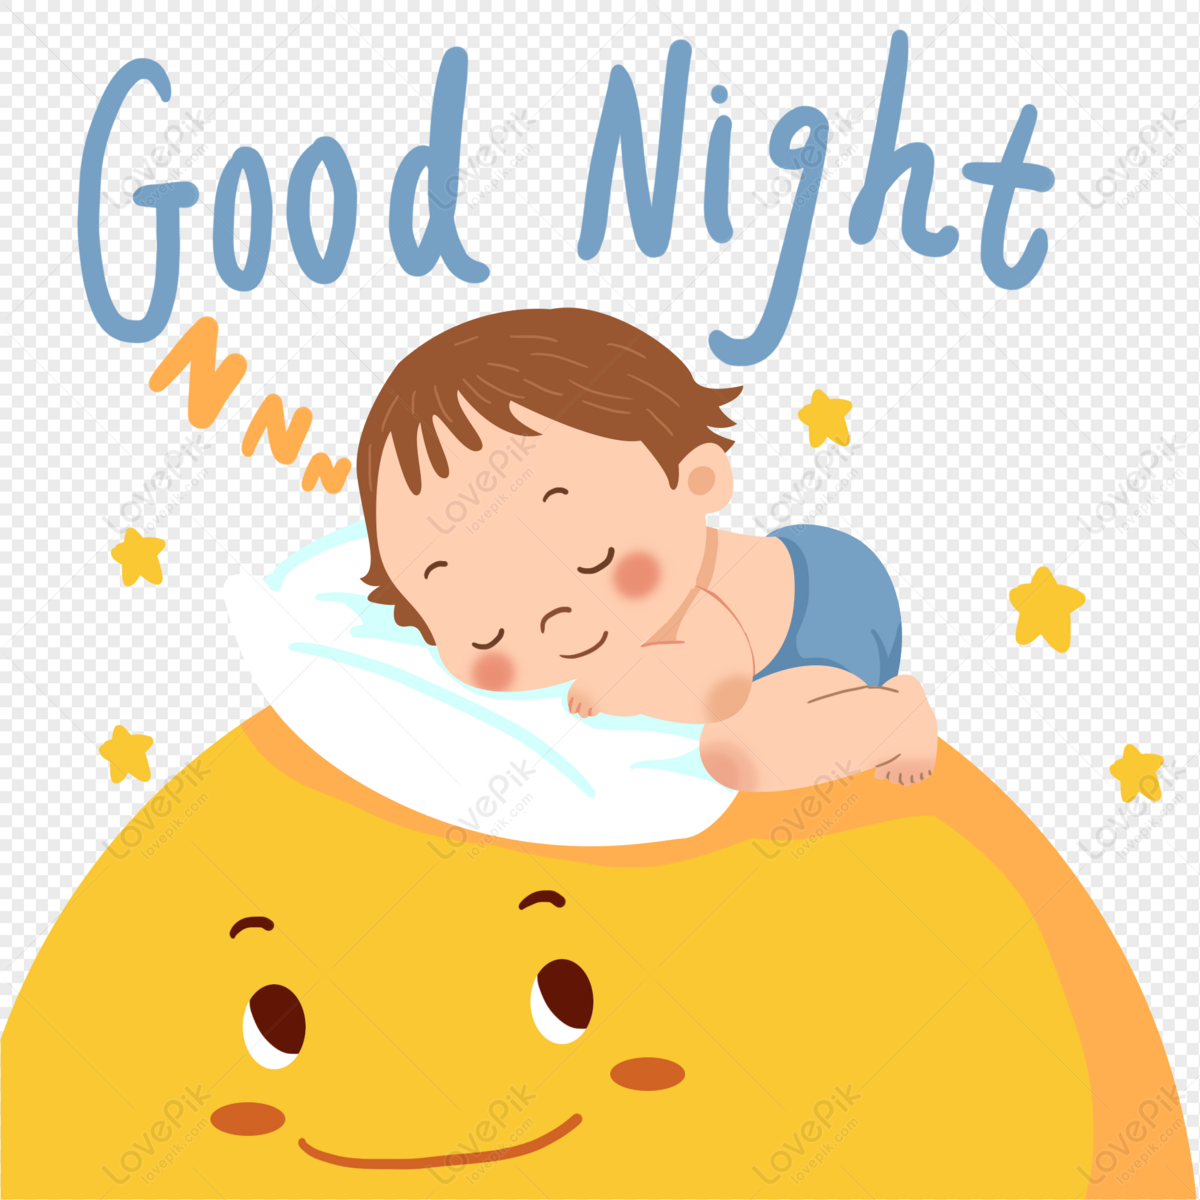 Little Baby Baby Sleeping On The Moon PNG Transparent Image And ...